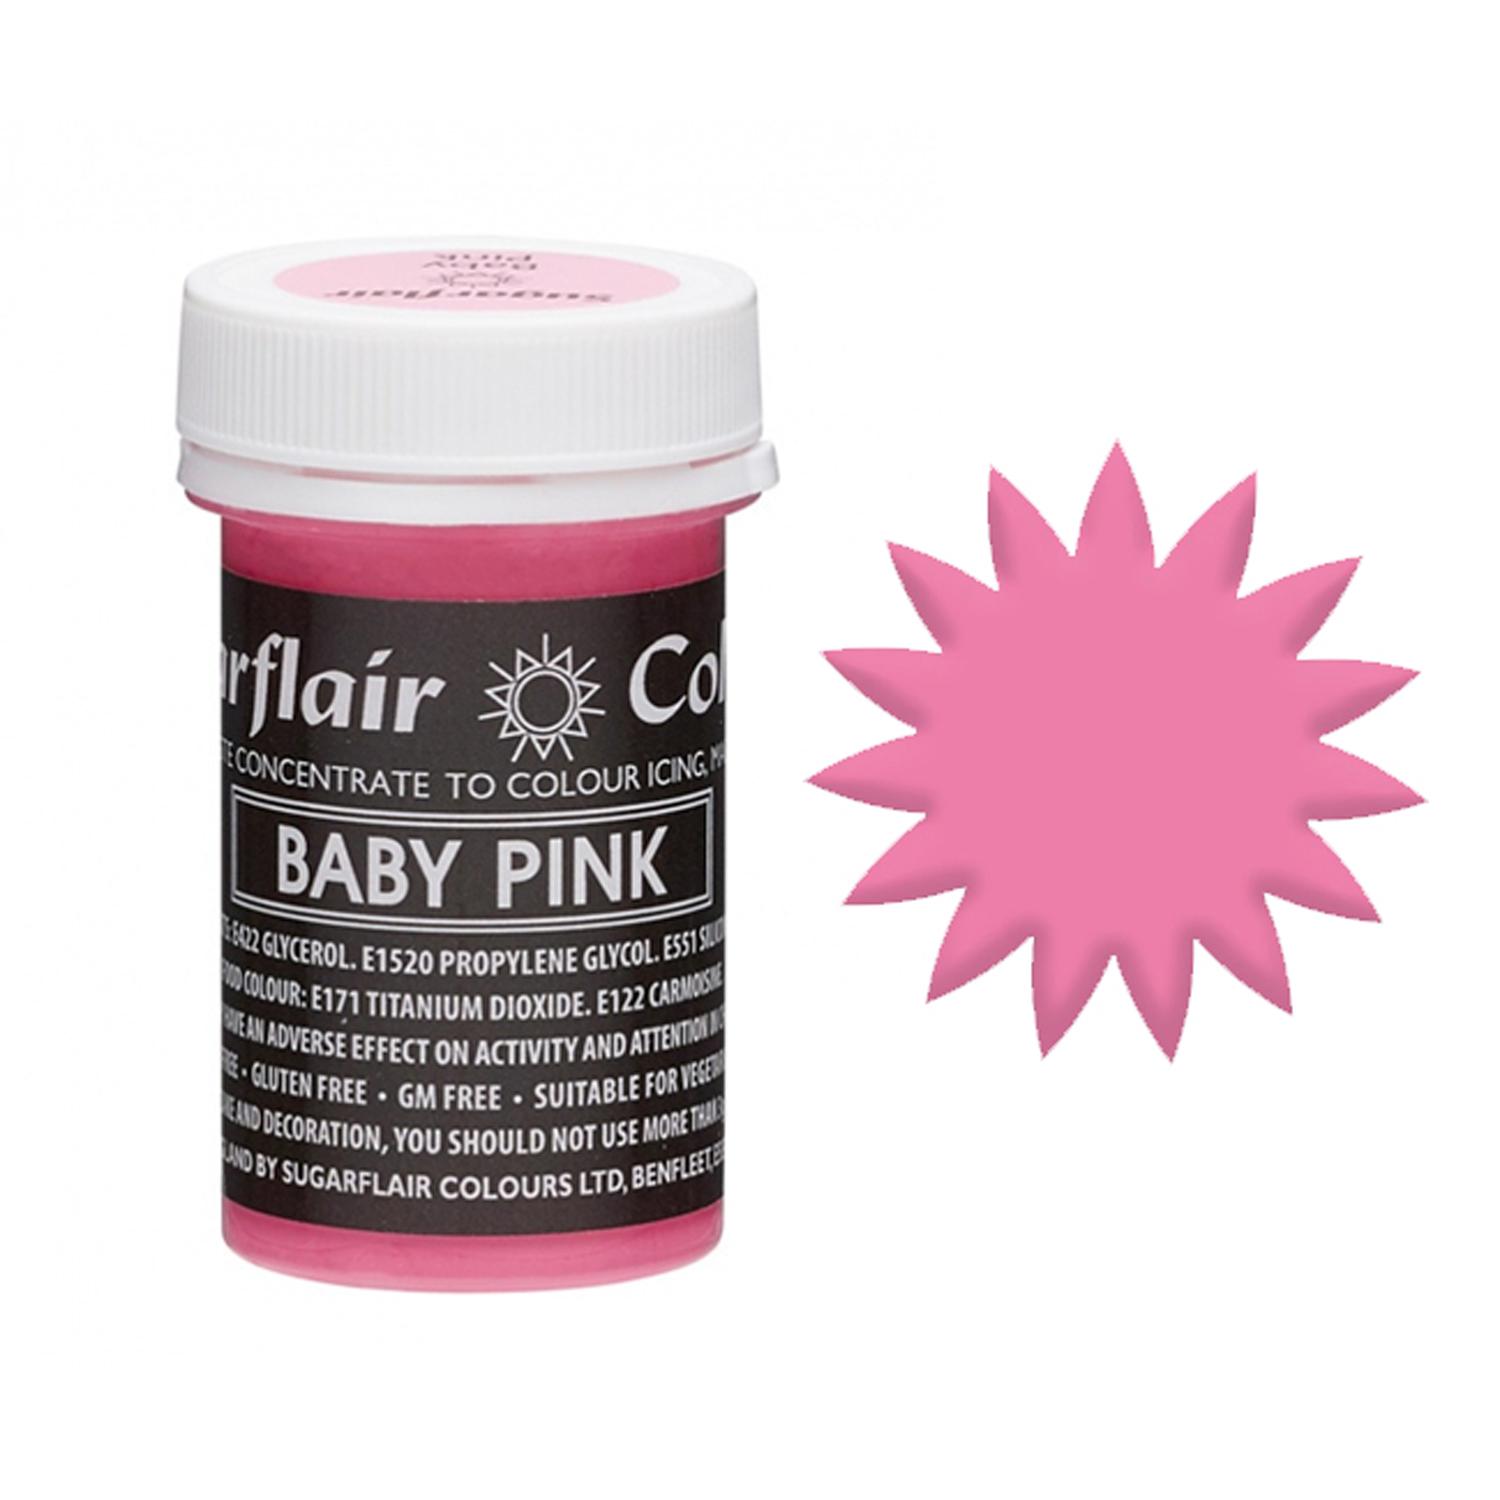 SUGARFLAIR COLOURS PASTEL PASTE BABY PINK 25GMS